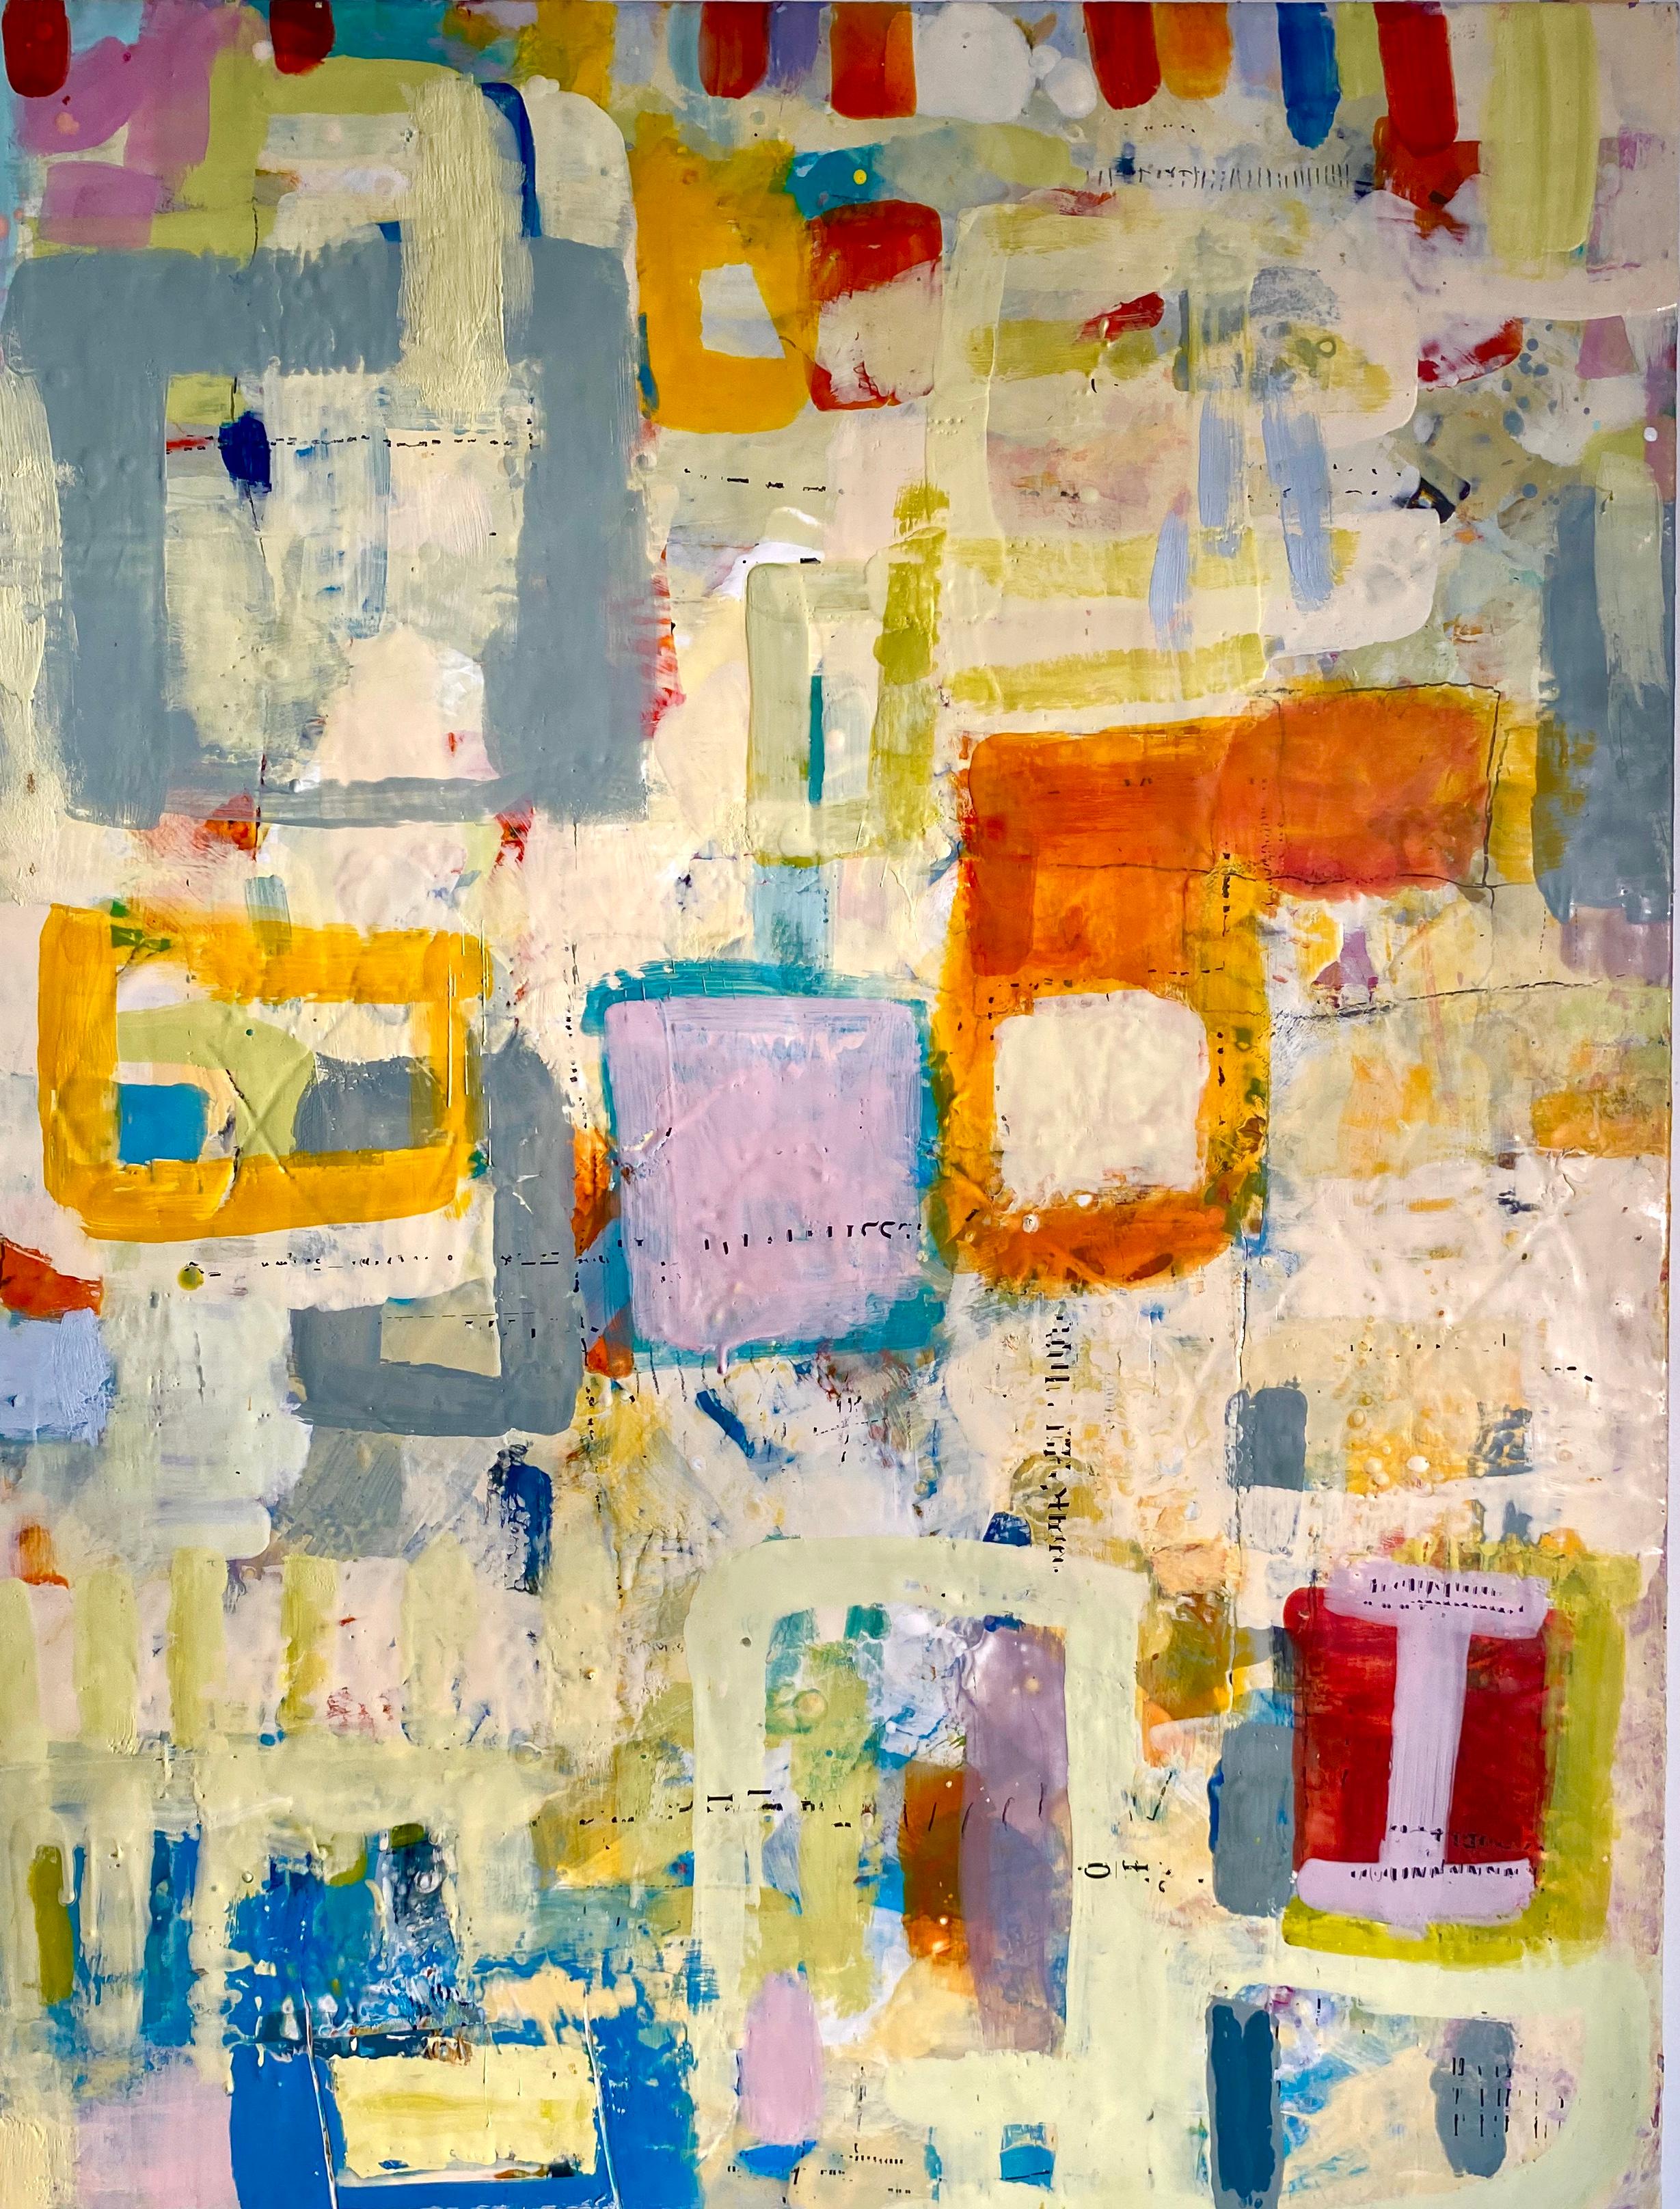 April, bright mulitcolored abstract encaustic painting on board